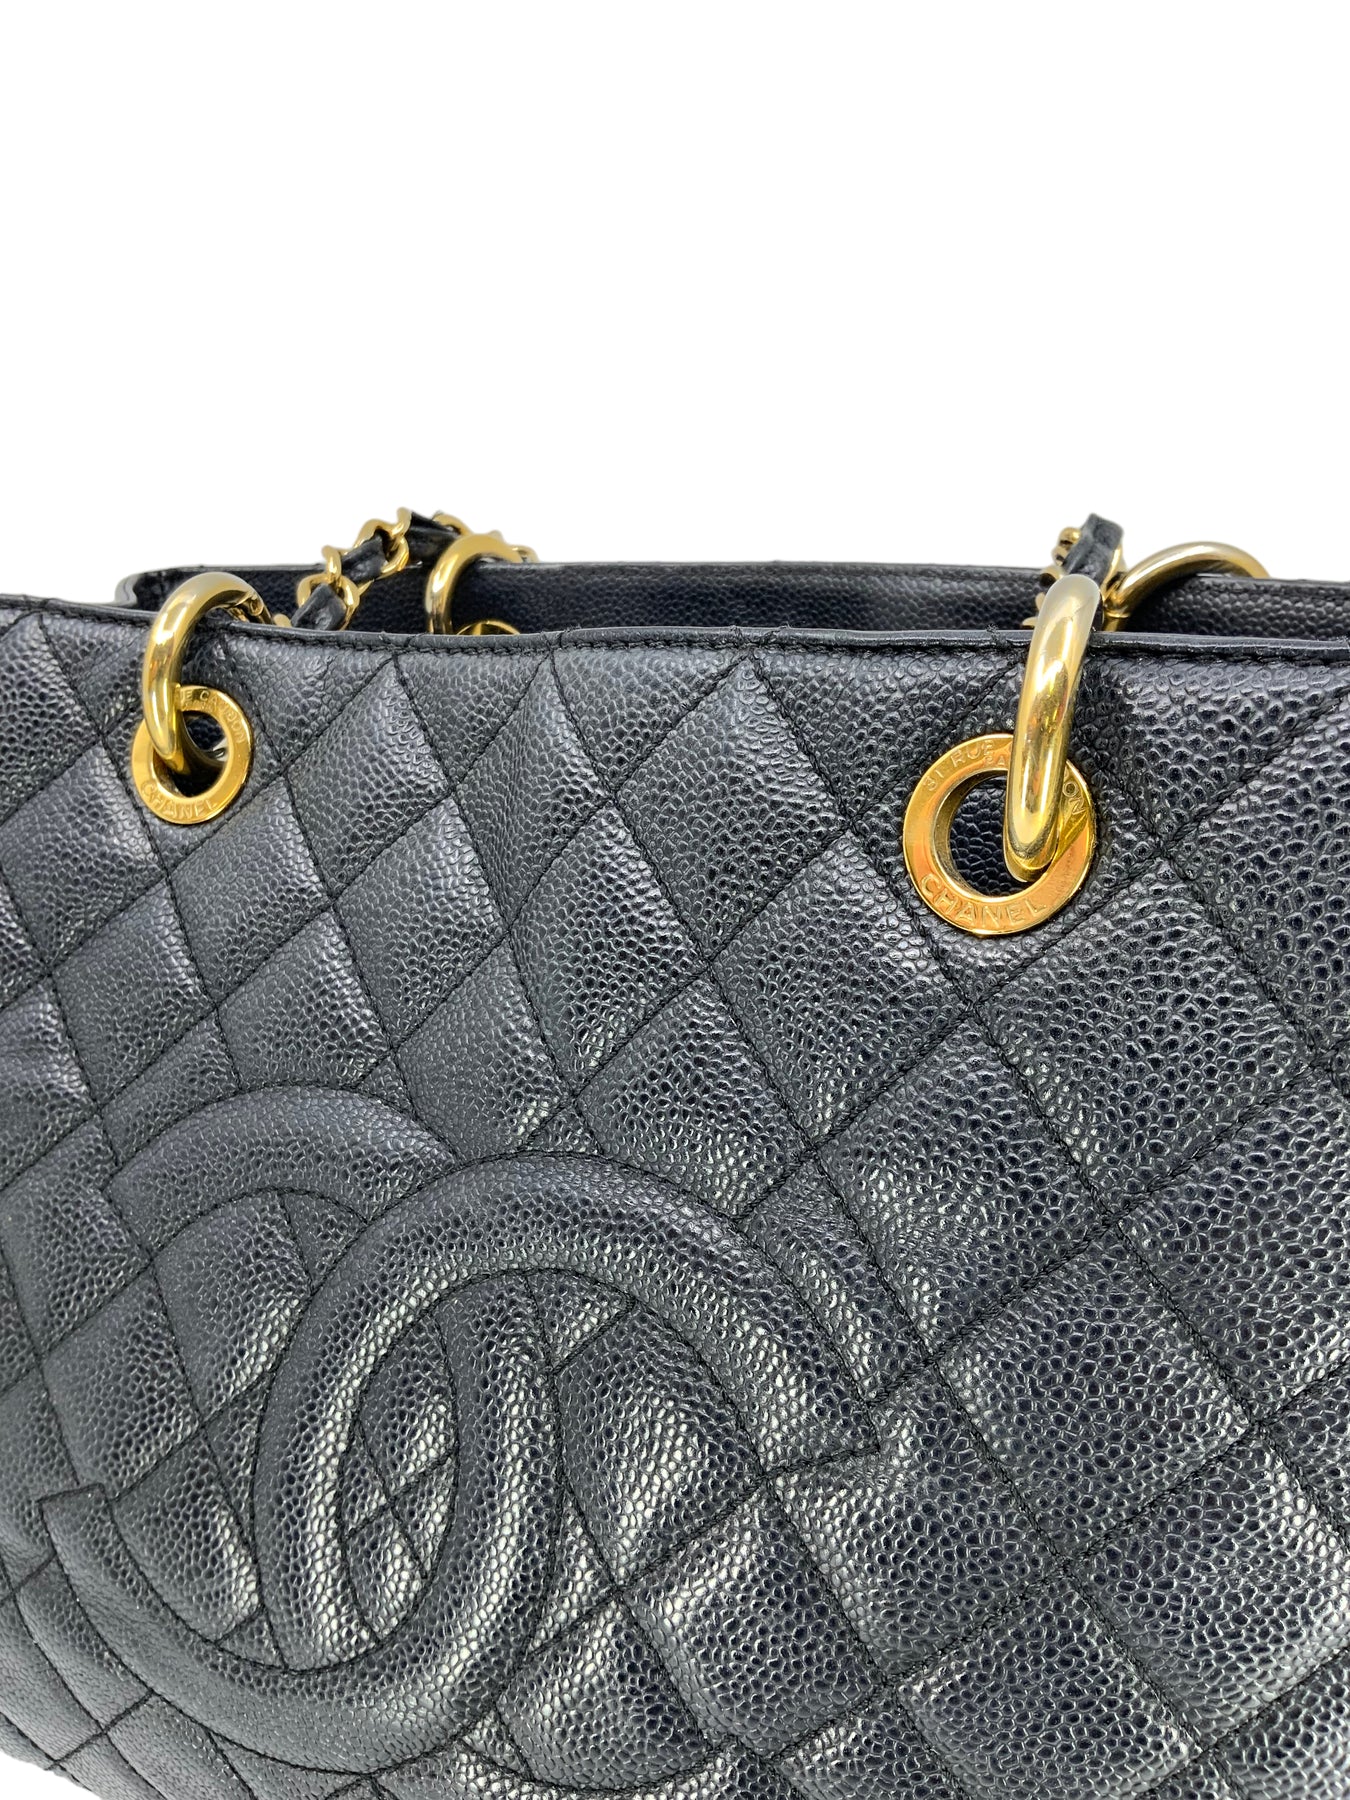 Chanel Caviar Leather GST Grand Shopping Tote Bag - Consigned Designs